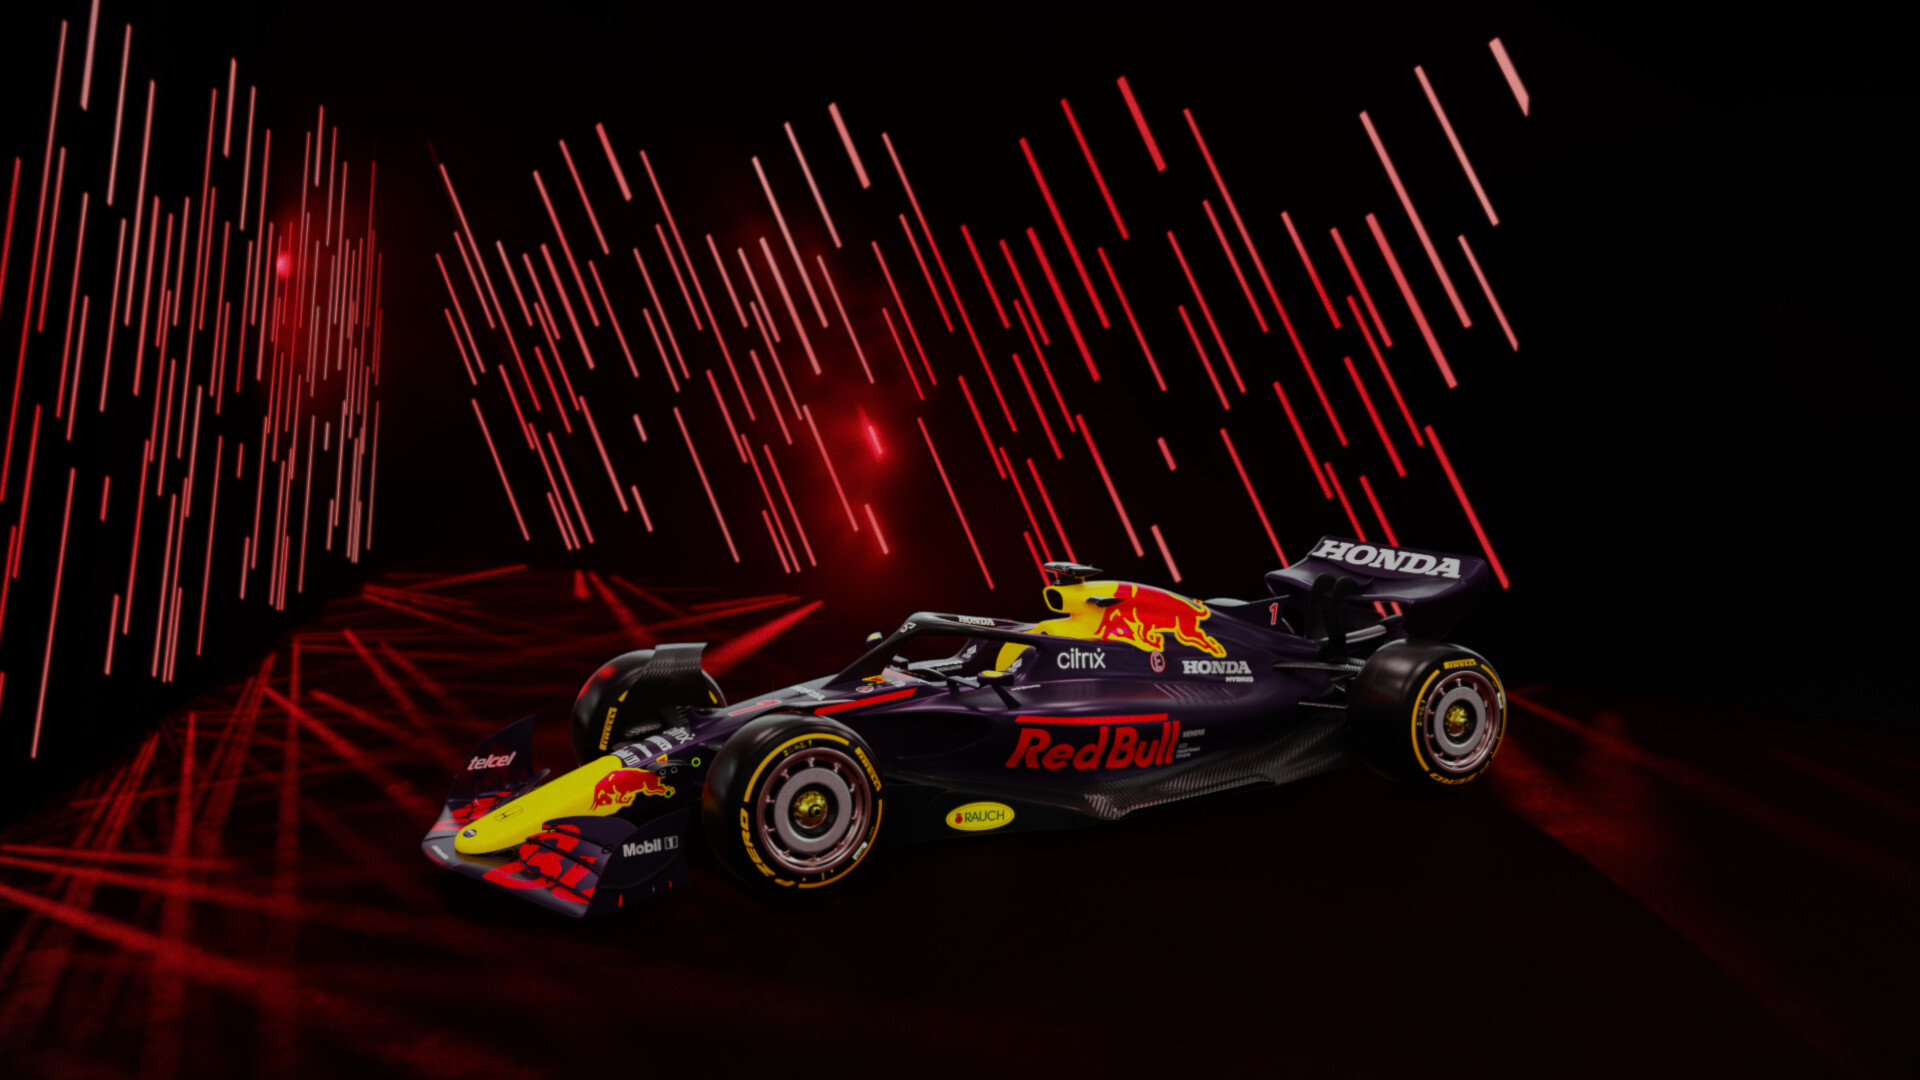 Red Bull RB18 concept - Finished Projects - Blender Artists Community